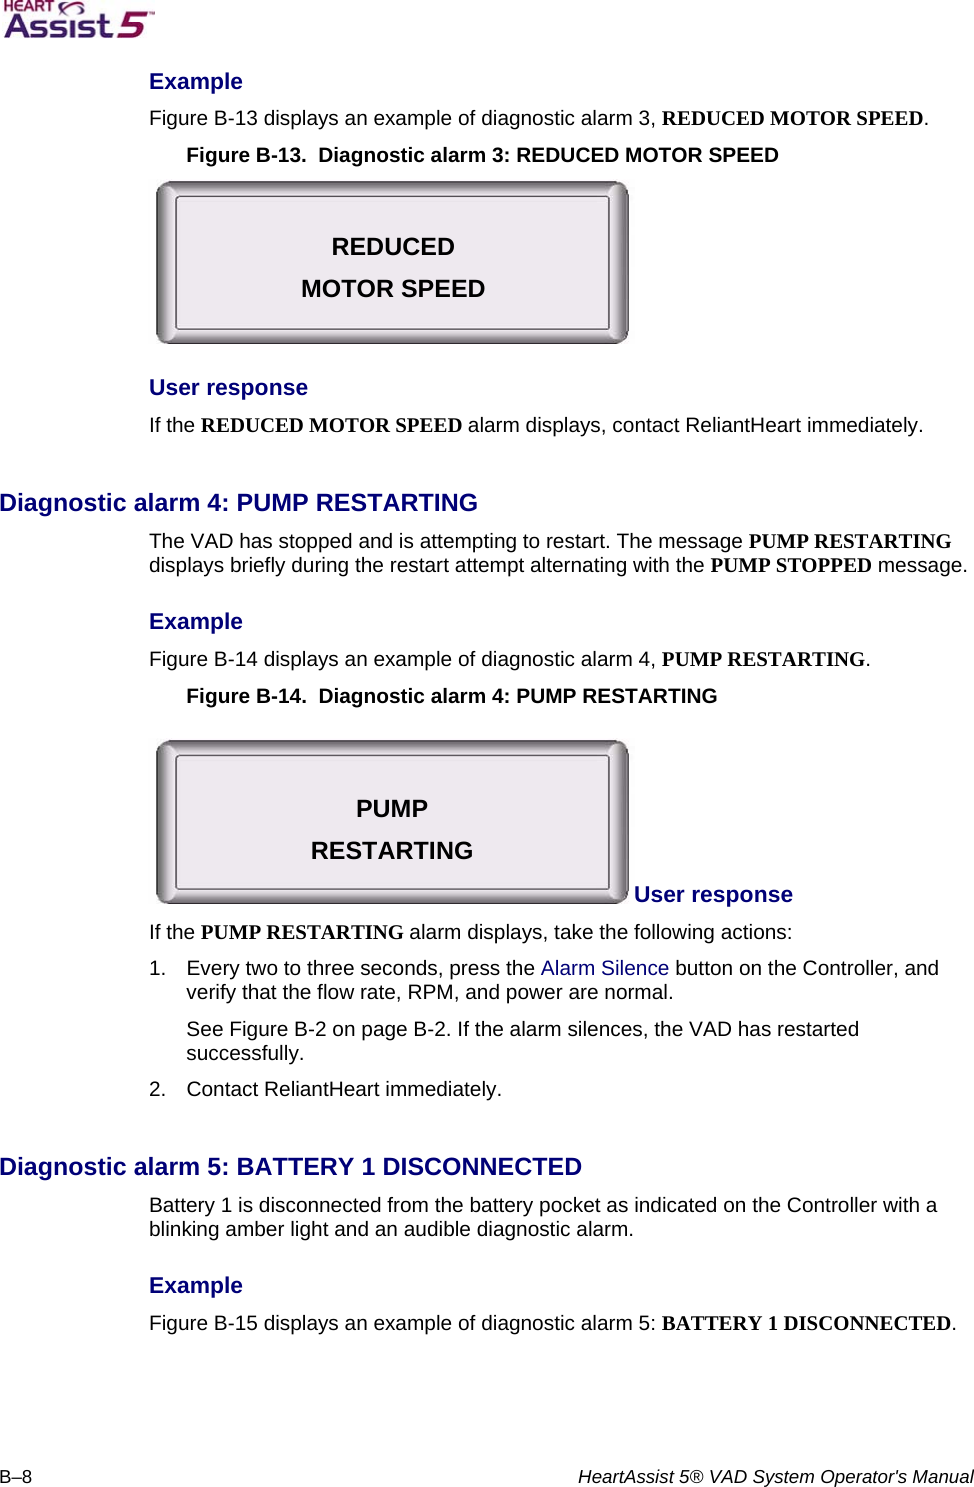   B–8  HeartAssist 5® VAD System Operator&apos;s Manual Example  Figure B-13 displays an example of diagnostic alarm 3, REDUCED MOTOR SPEED.  Figure B-13.  Diagnostic alarm 3: REDUCED MOTOR SPEED  User response  If the REDUCED MOTOR SPEED alarm displays, contact ReliantHeart immediately.   Diagnostic alarm 4: PUMP RESTARTING  The VAD has stopped and is attempting to restart. The message PUMP RESTARTING displays briefly during the restart attempt alternating with the PUMP STOPPED message.  Example  Figure B-14 displays an example of diagnostic alarm 4, PUMP RESTARTING.  Figure B-14.  Diagnostic alarm 4: PUMP RESTARTING User response  If the PUMP RESTARTING alarm displays, take the following actions:  1.  Every two to three seconds, press the Alarm Silence button on the Controller, and verify that the flow rate, RPM, and power are normal.  See Figure B-2 on page B-2. If the alarm silences, the VAD has restarted successfully.  2.  Contact ReliantHeart immediately.   Diagnostic alarm 5: BATTERY 1 DISCONNECTED  Battery 1 is disconnected from the battery pocket as indicated on the Controller with a blinking amber light and an audible diagnostic alarm.  Example  Figure B-15 displays an example of diagnostic alarm 5: BATTERY 1 DISCONNECTED.  REDUCED MOTOR SPEED PUMP RESTARTING 